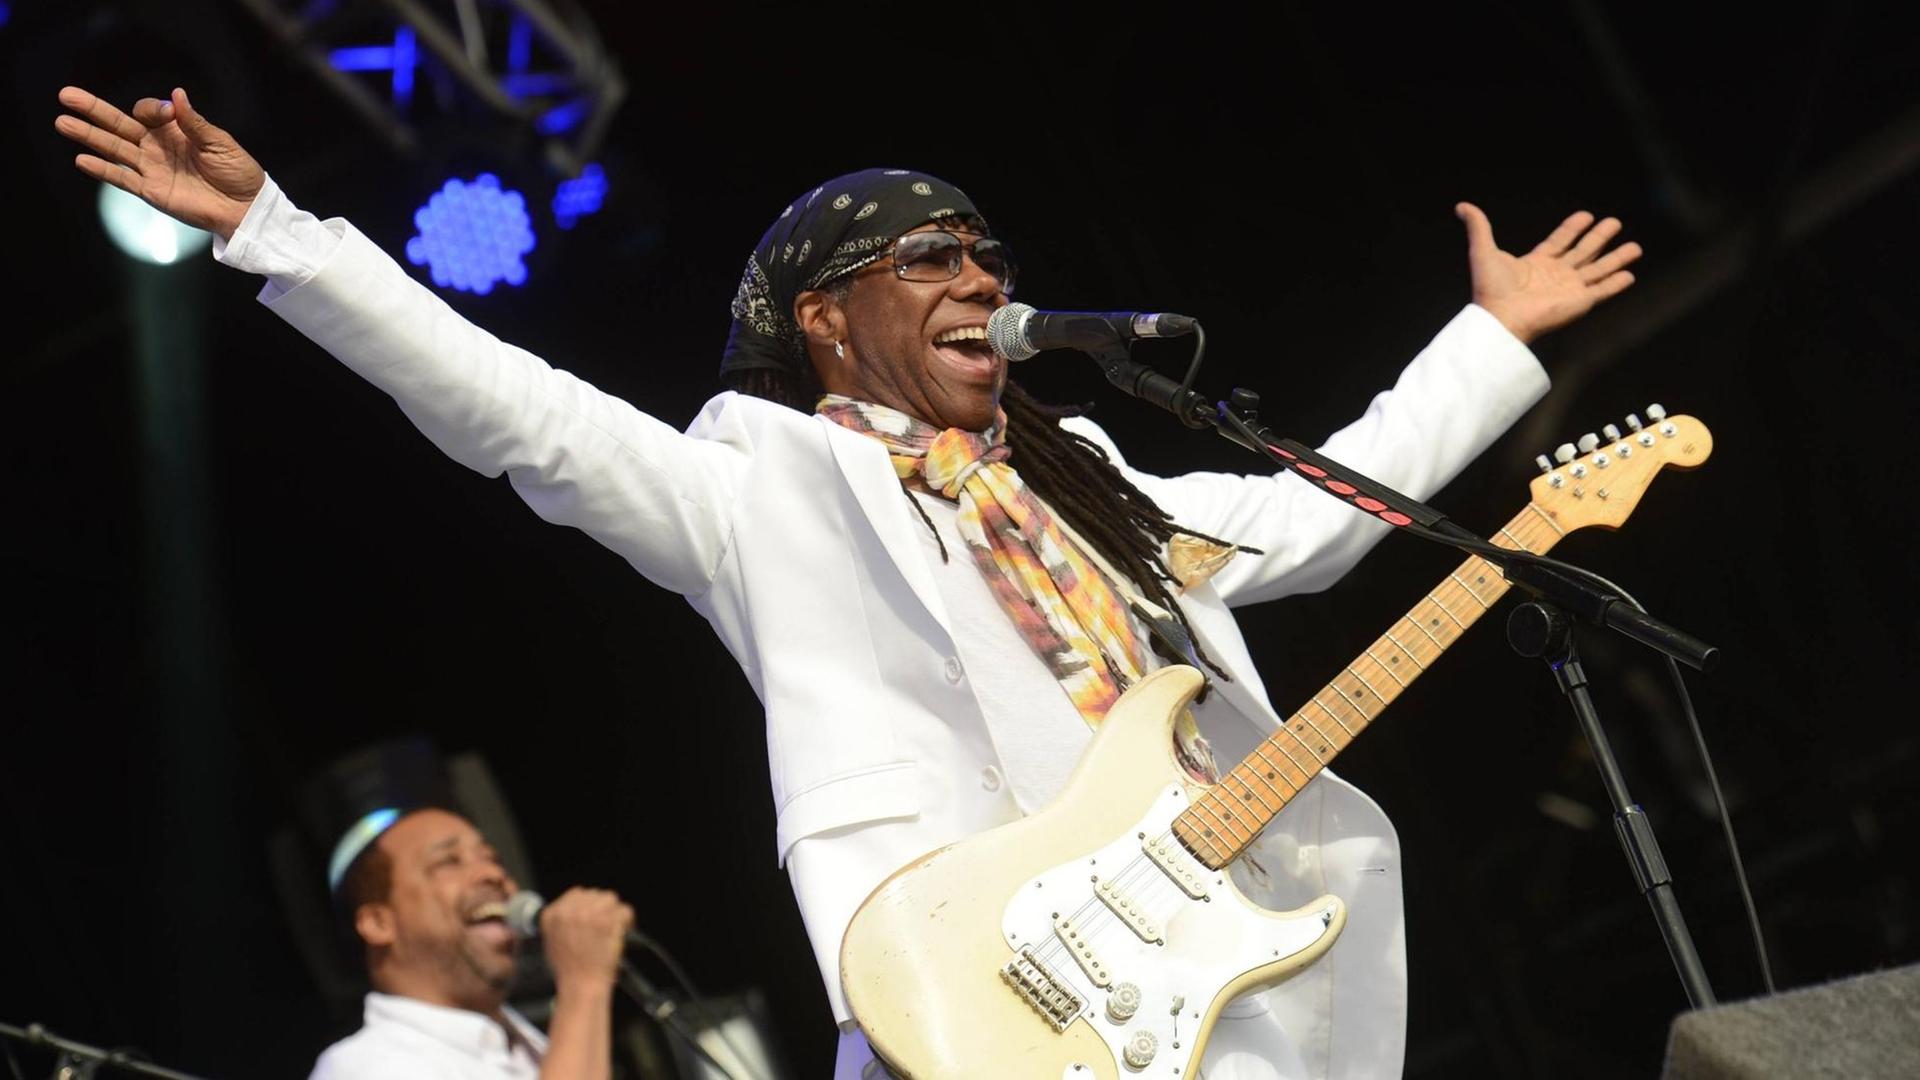 Bildnummer: 58115246 Datum: 17.06.2012 Copyright: imago/UPI Photo American artist Nile Rodgers perform with Chic at Lovebox Festival in Victoria Park in London on June 17, 2012. PUBLICATIONxINxGERxSUIxAUTxHUNxONLY Kultur People Musik Aktion xcb x0x 2012 quer 58115246 Date 17 06 2012 Copyright Imago UPi Photo American Artist Nile Rodgers perform With Chic AT Lovebox Festival in Victoria Park in London ON June 17 2012 PUBLICATIONxINxGERxSUIxAUTxHUNxONLY Culture Celebrities Music Action shot x0x 2012 horizontal